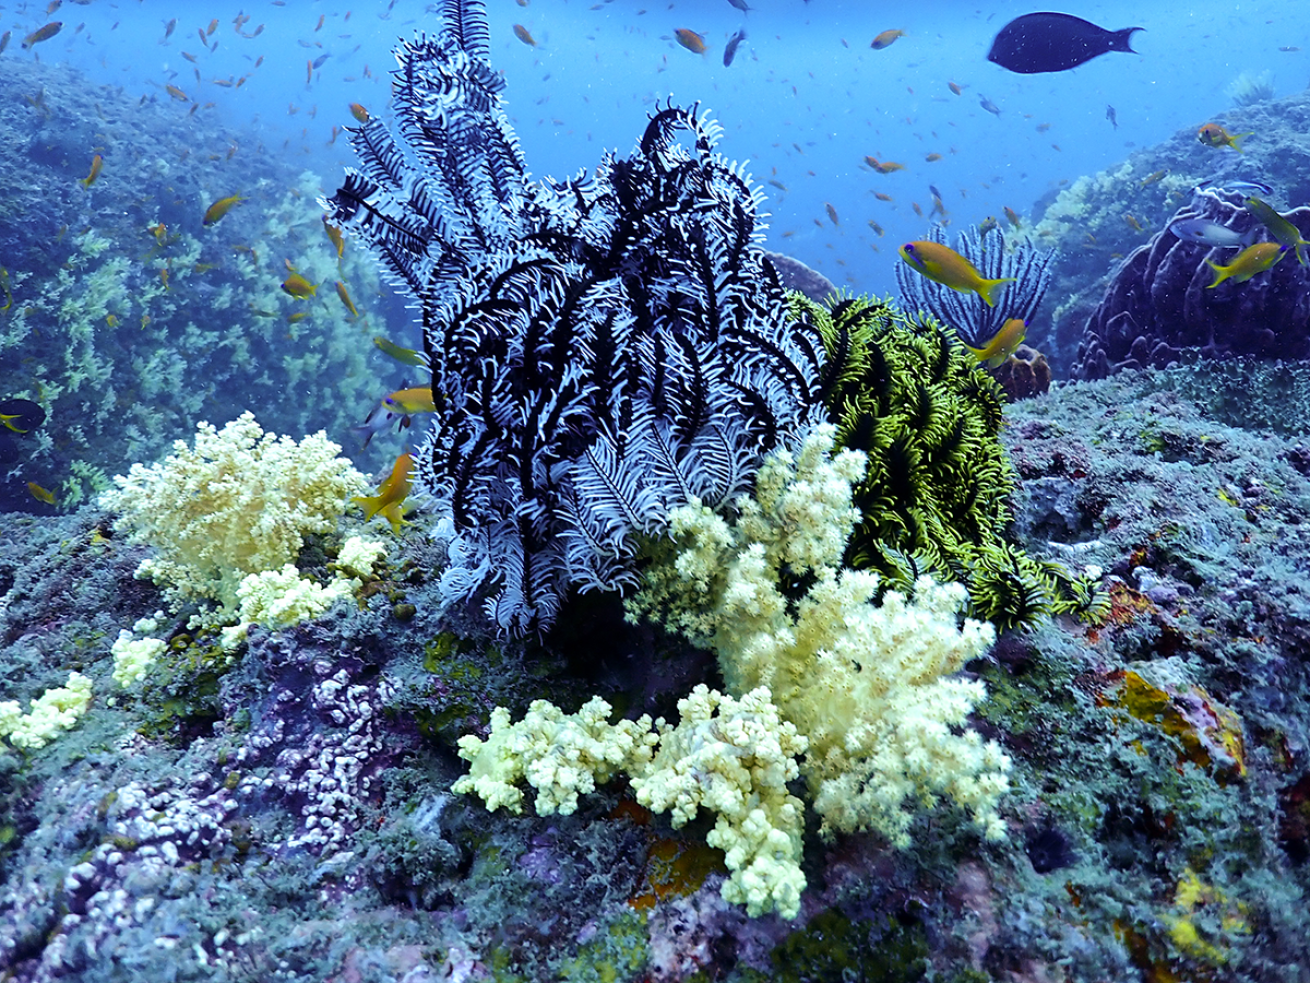 Picture of a reef in the bottom of the ocean.